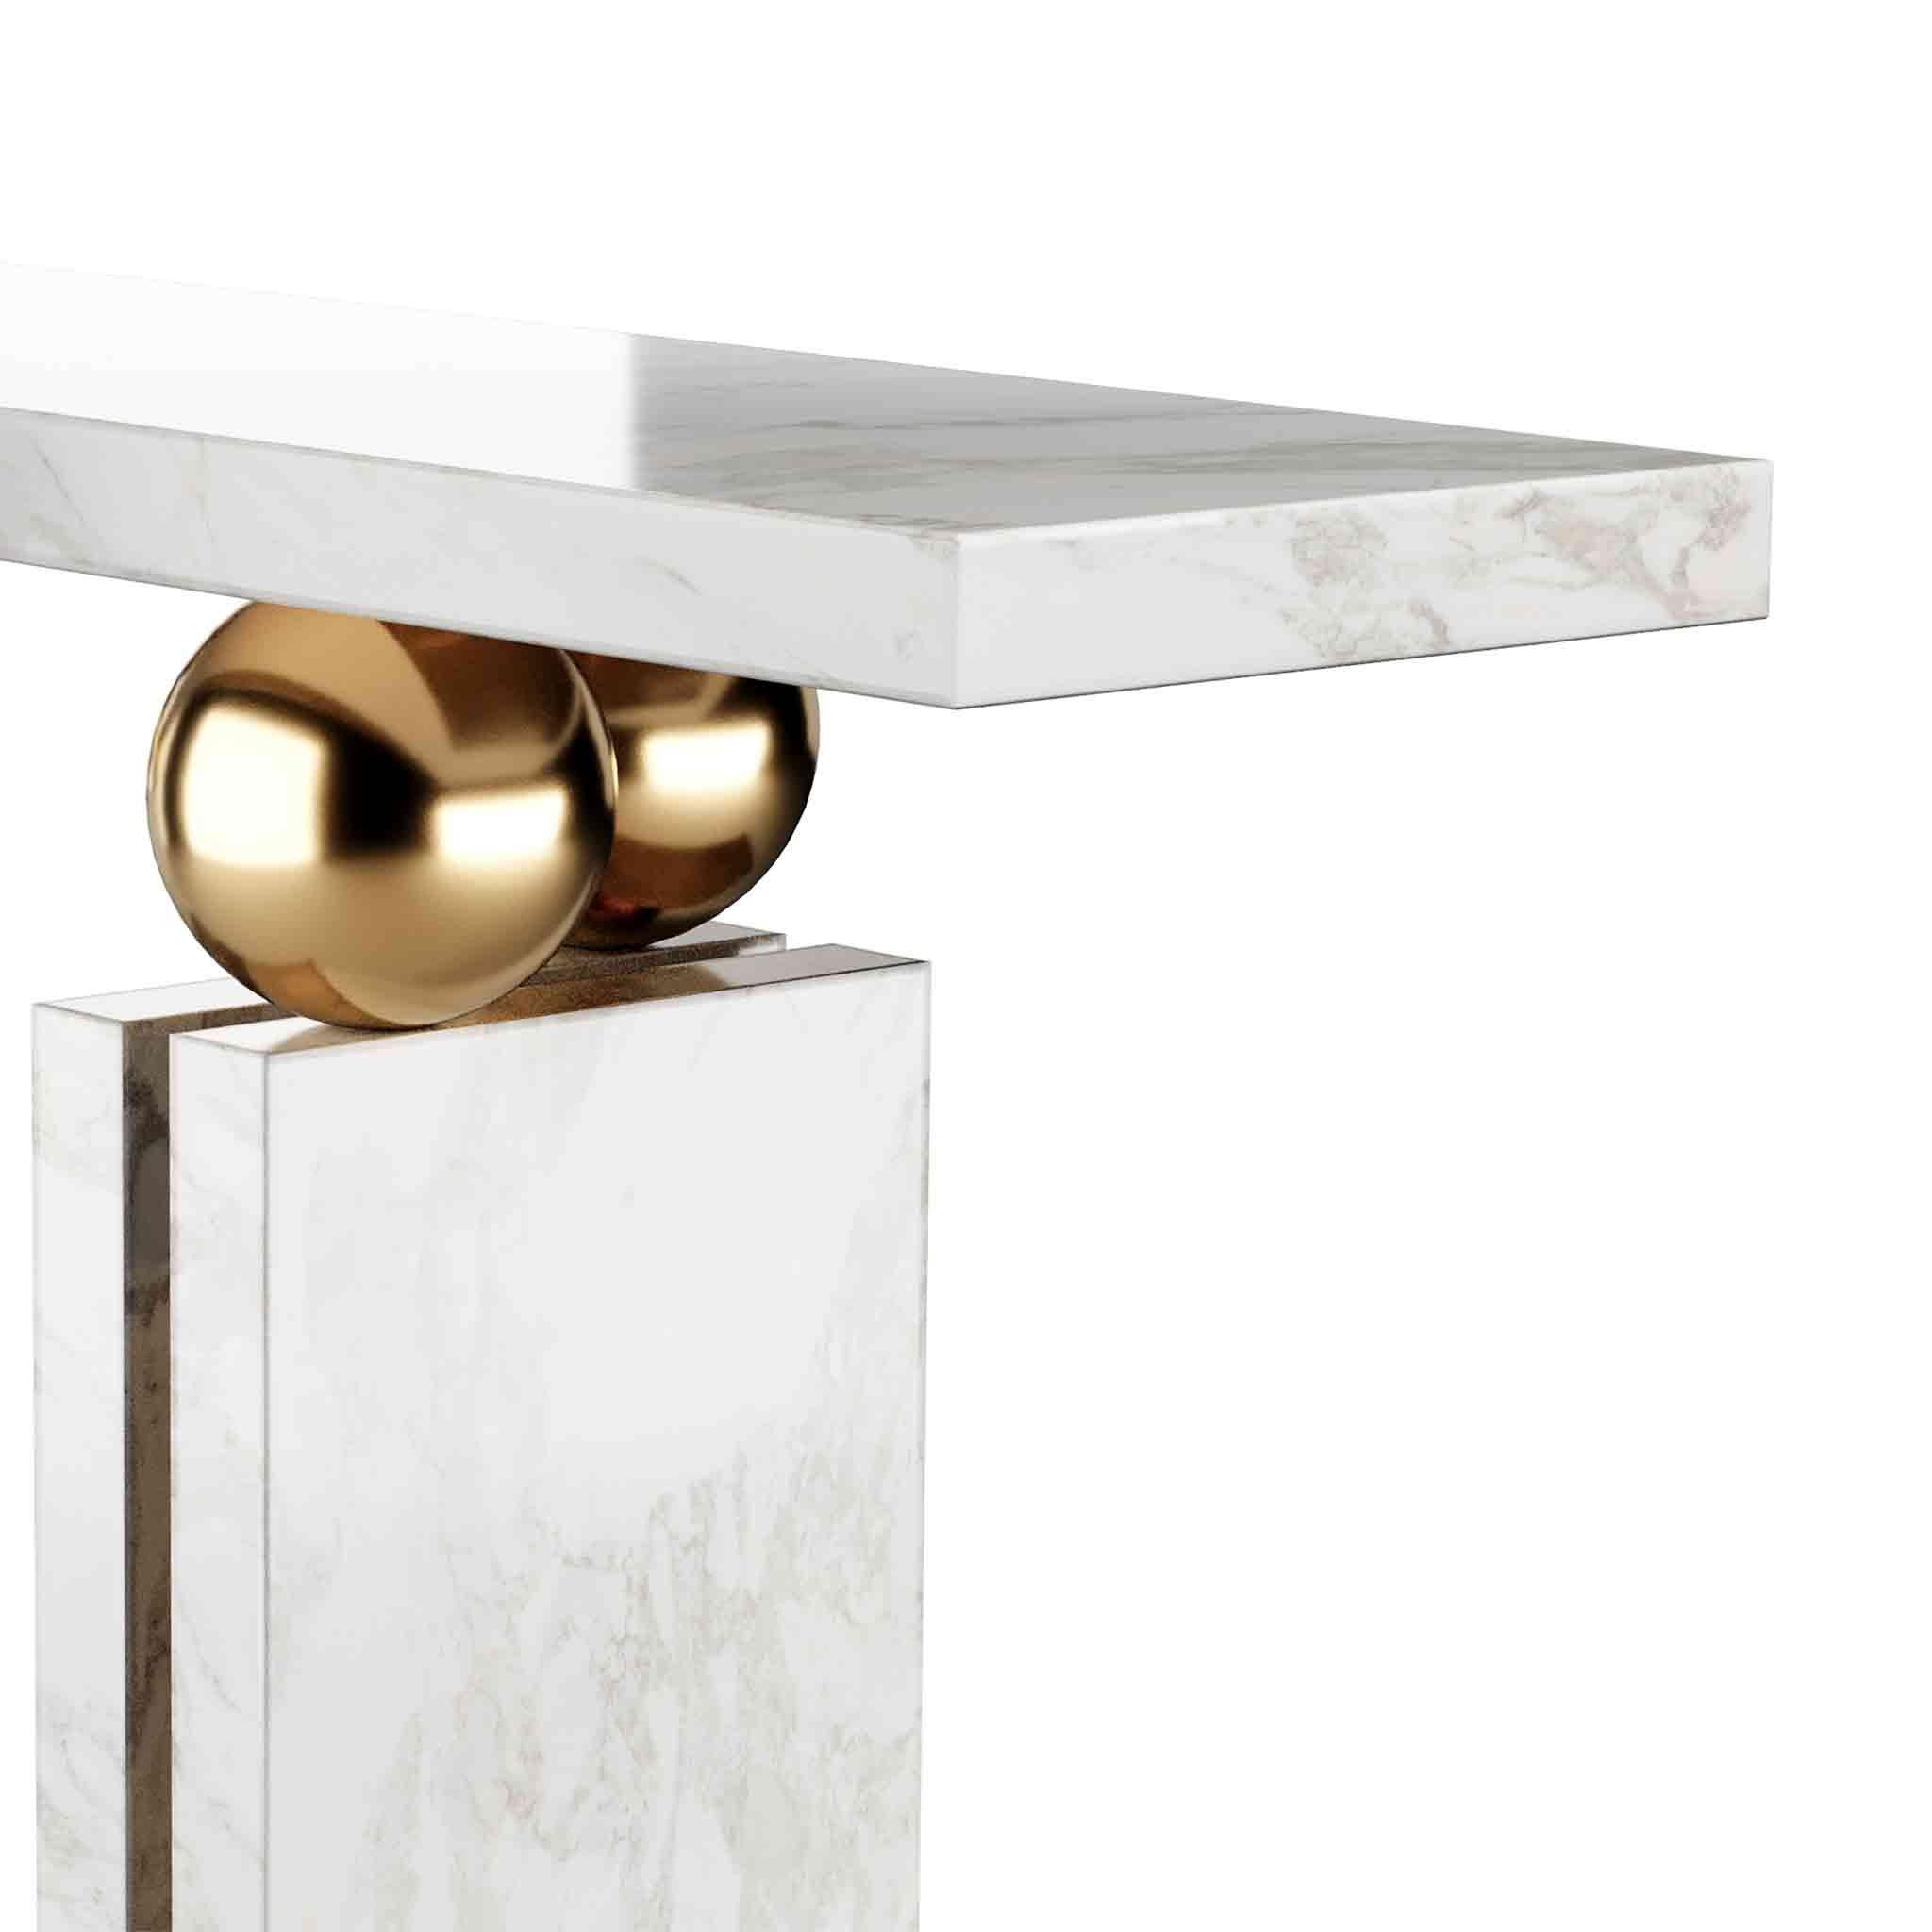 Quantic Estremoz Console Table is an enigmatic design piece. A futuristic console table that defies the laws of physics and impresses with its aesthetic balance. A modern console table in Estremoz mable that suits perfectly a luxury entry hall